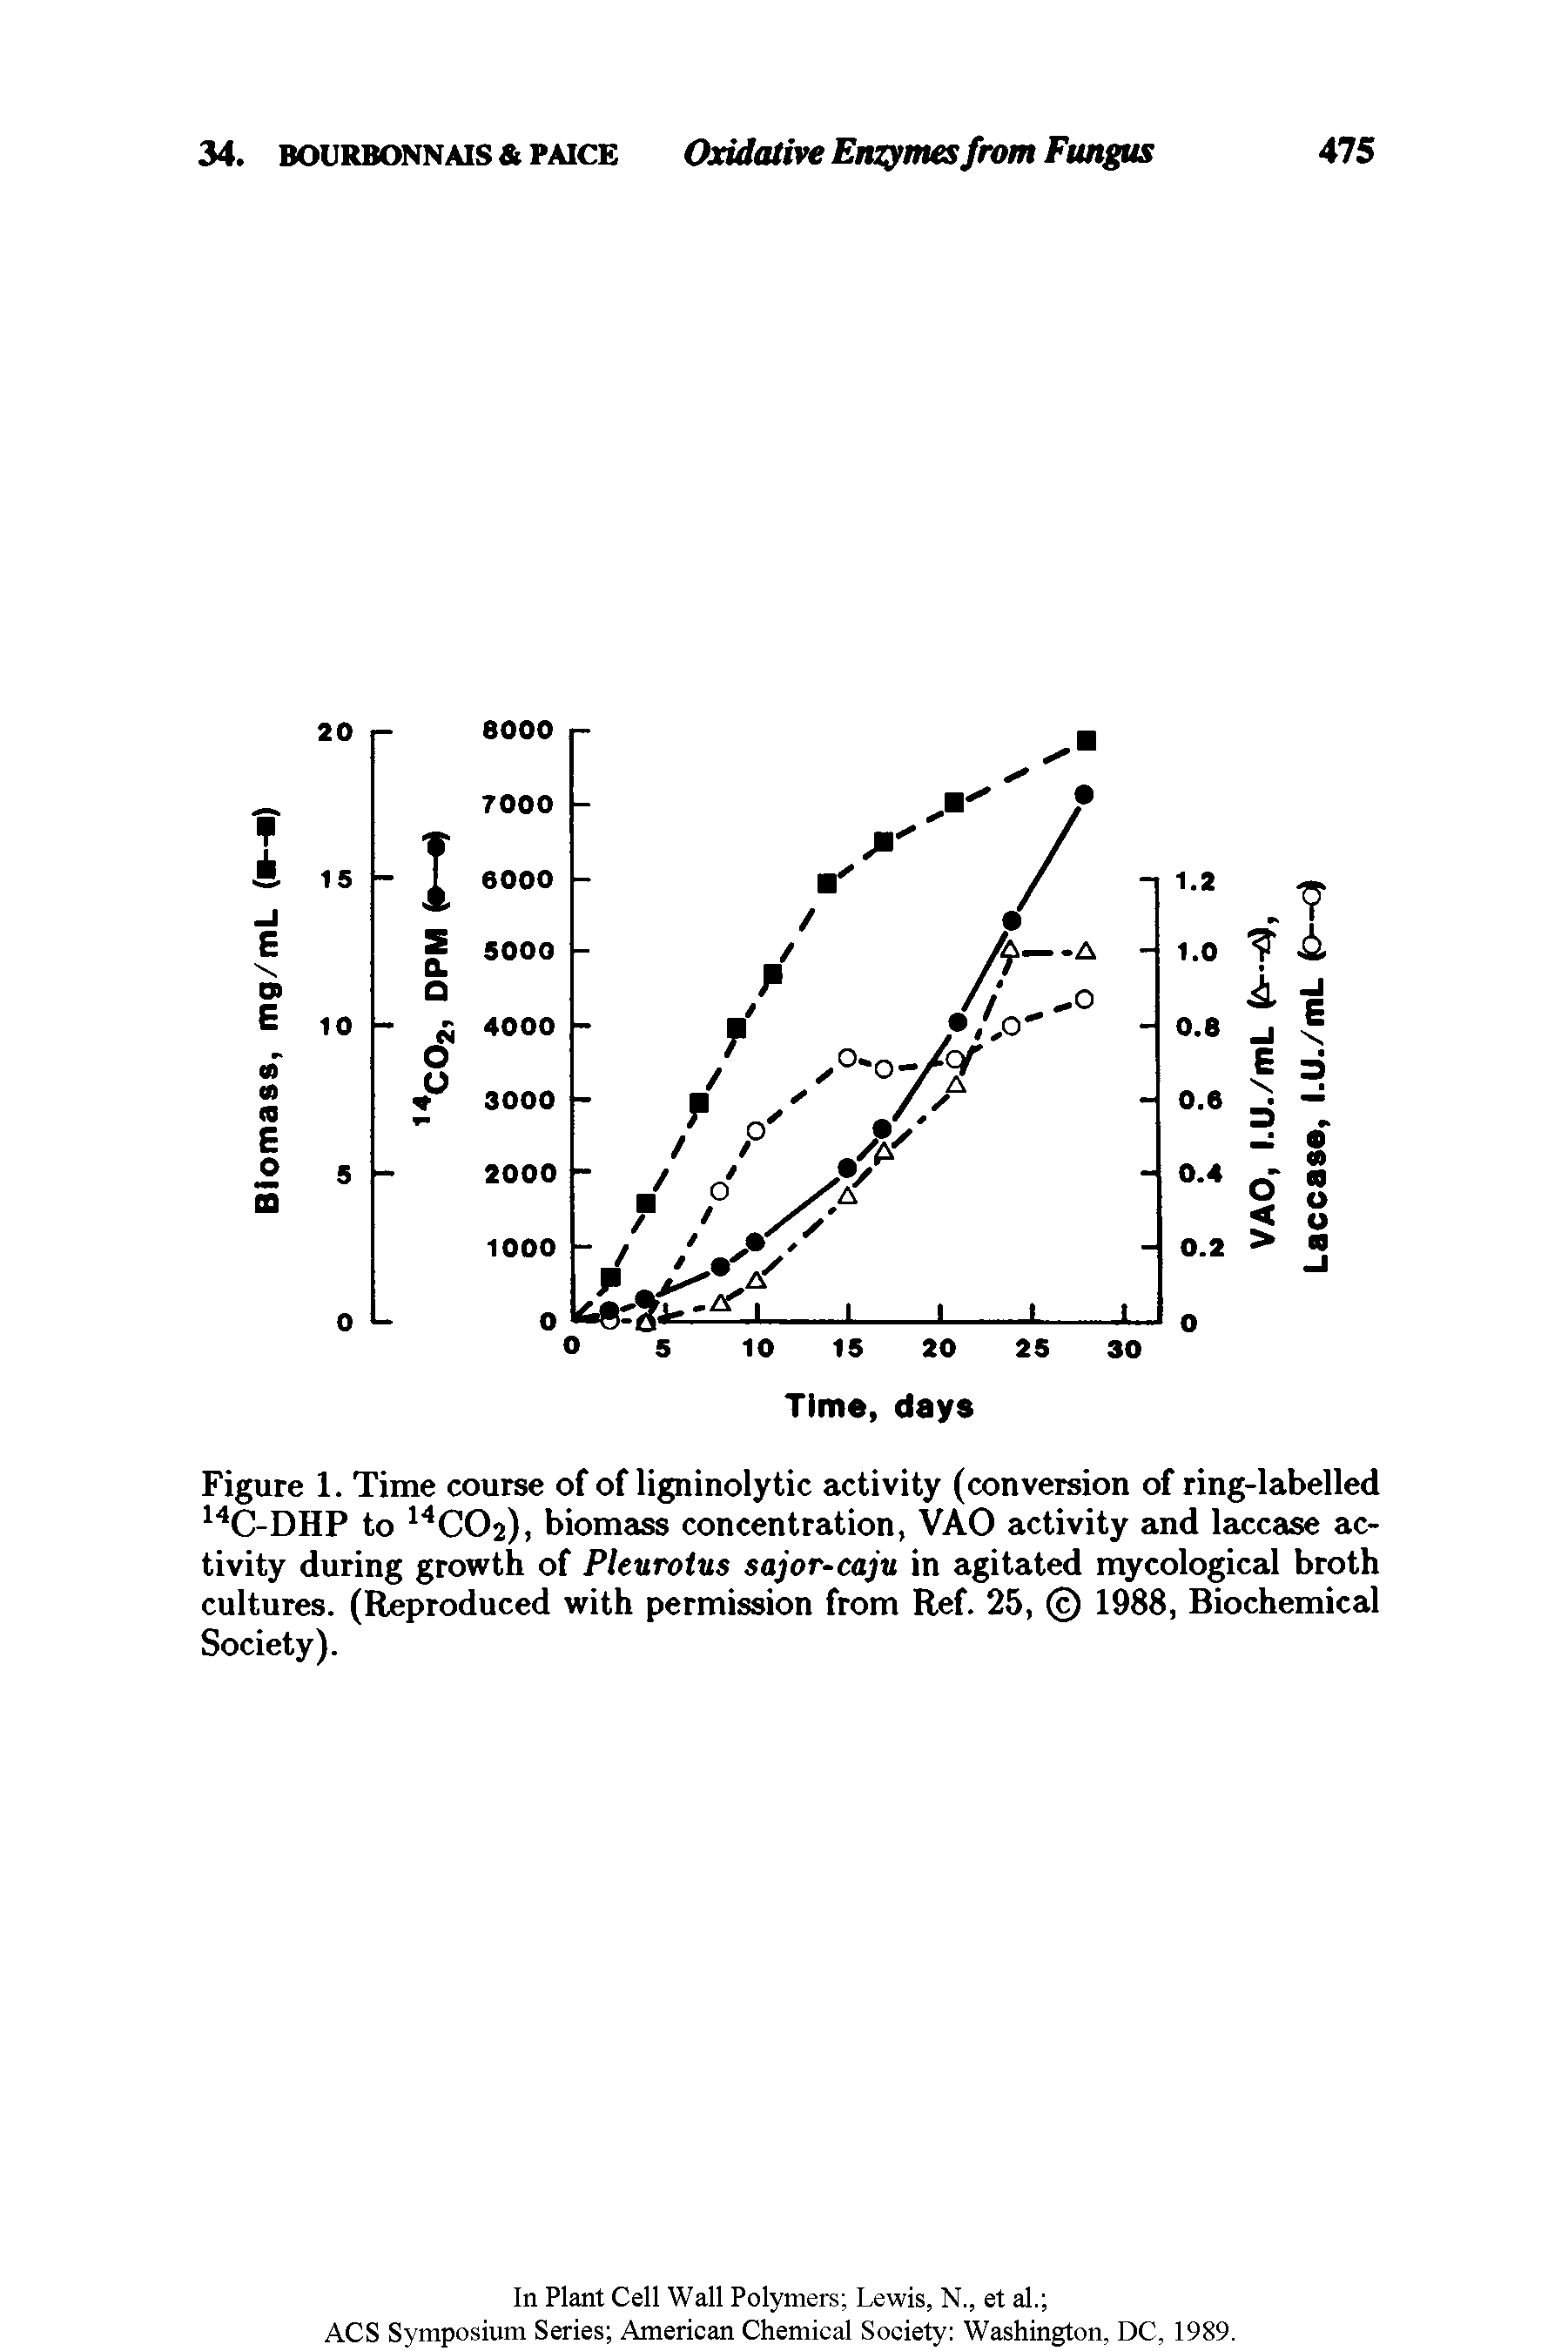 Figure 1. Time course of of ligninolytic activity (conversion of ring-labelled 14C-DHP to 14C02), biomass concentration, VAO activity and laccase activity during growth of Pleuroius sajor-caju in agitated mycological broth cultures. (Reproduced with permission from Ref. 25, 1988, Biochemical Society).